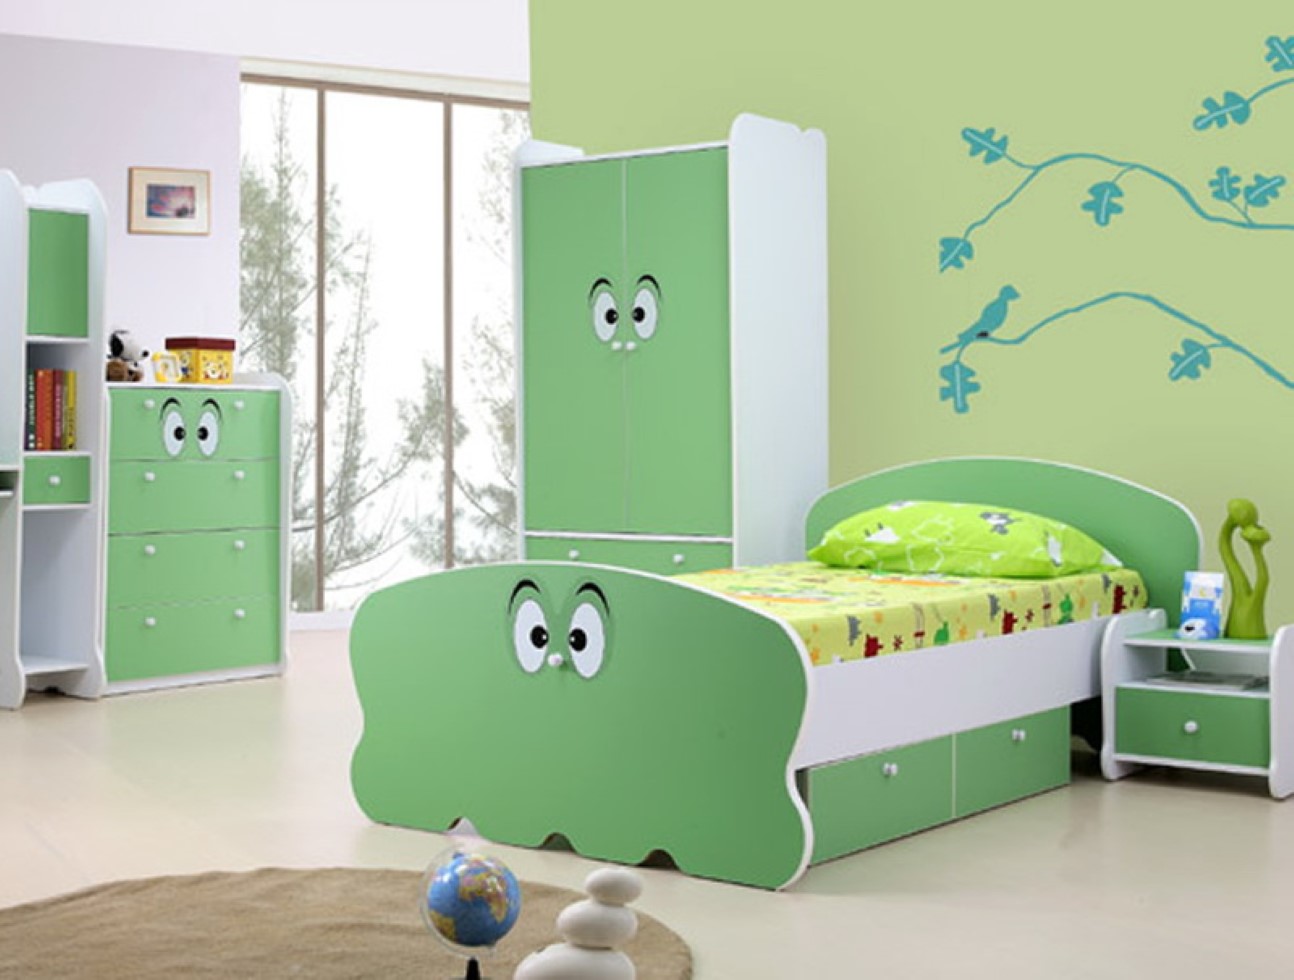 Green White For Astonishing Green White Furniture Style For Trendy Kids Bedroom Design With Tree Wall Decal Bedroom Kids Bedroom Ideas Added With Functional Furniture And Cute Decor